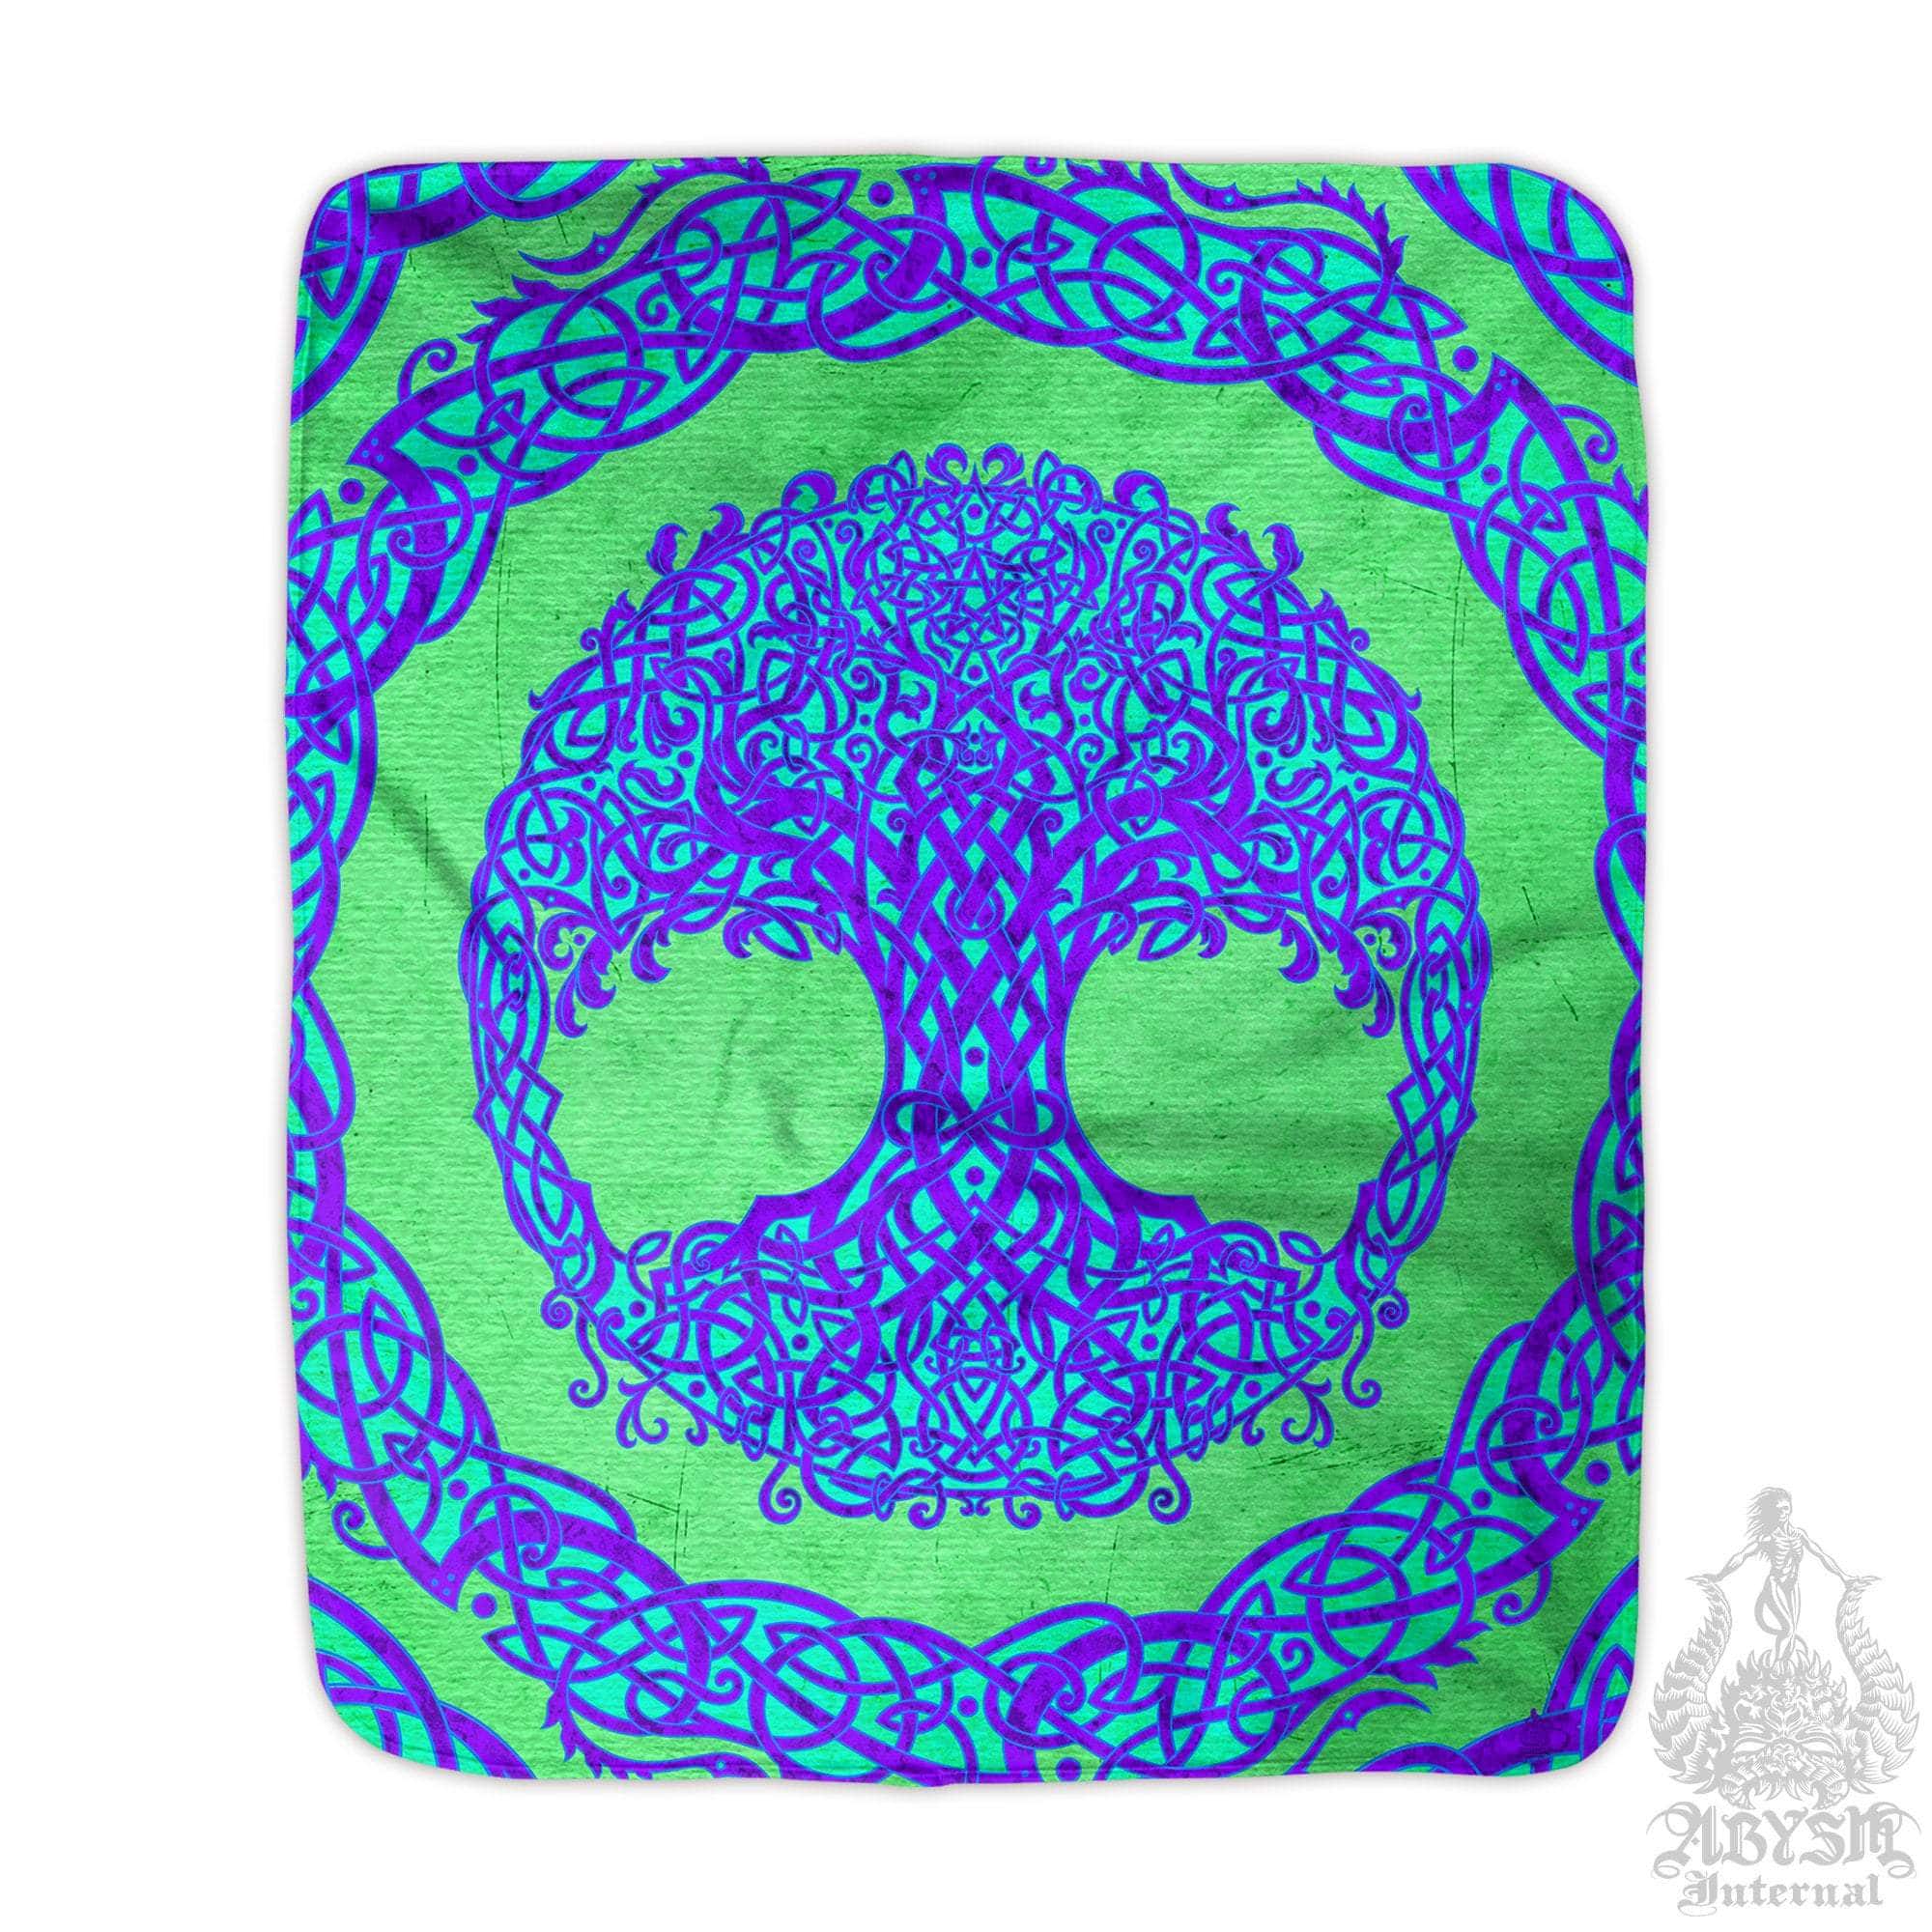 Tree of Life, Throw Fleece Blanket, Pagan Decor, Celtic Knot, Witchy Room, Wiccan - Psy, Green & Purple - Abysm Internal